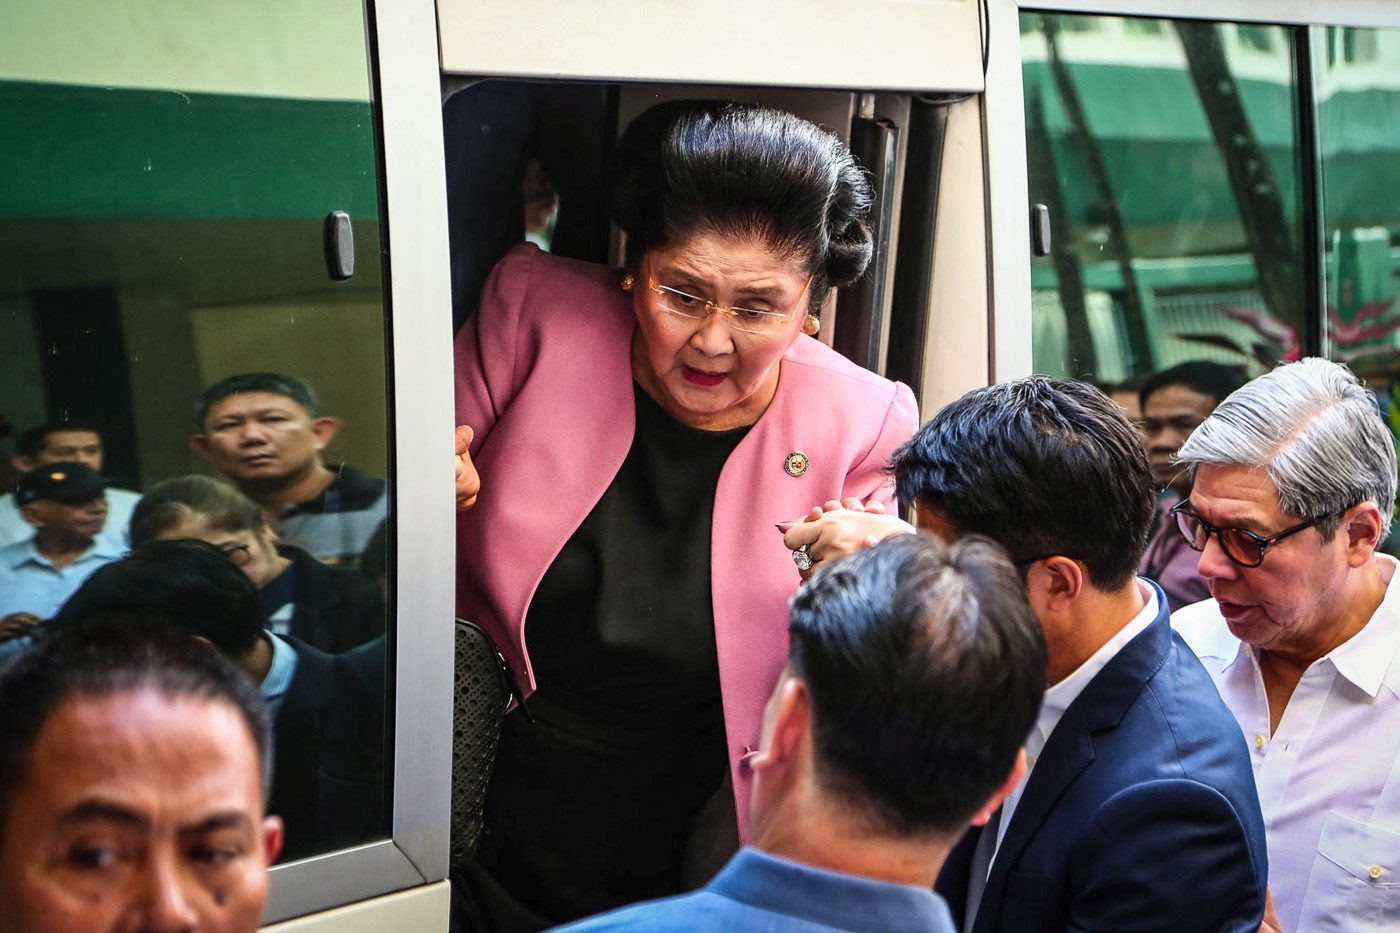 SANDIGANBAYAN HEARING. Former first lady and Ilocos Norte Representative Imelda Marcos arrives at the Sandiganbayan on November 16, 2018, to appear at a court hearing. Photo by Jire Carreon/Rappler  